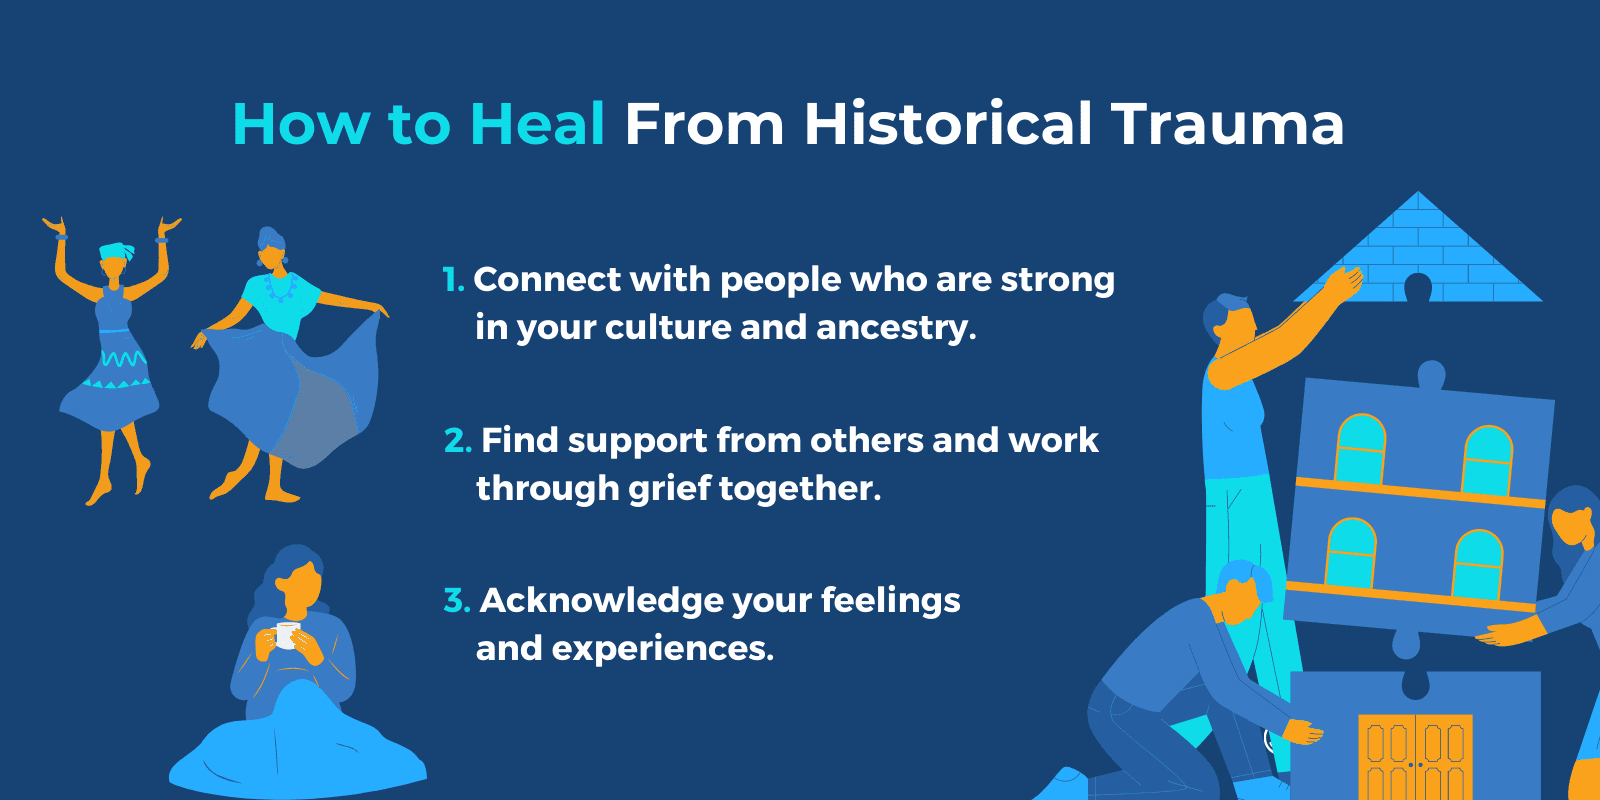 How to Heal From Historical Trauma Infographic